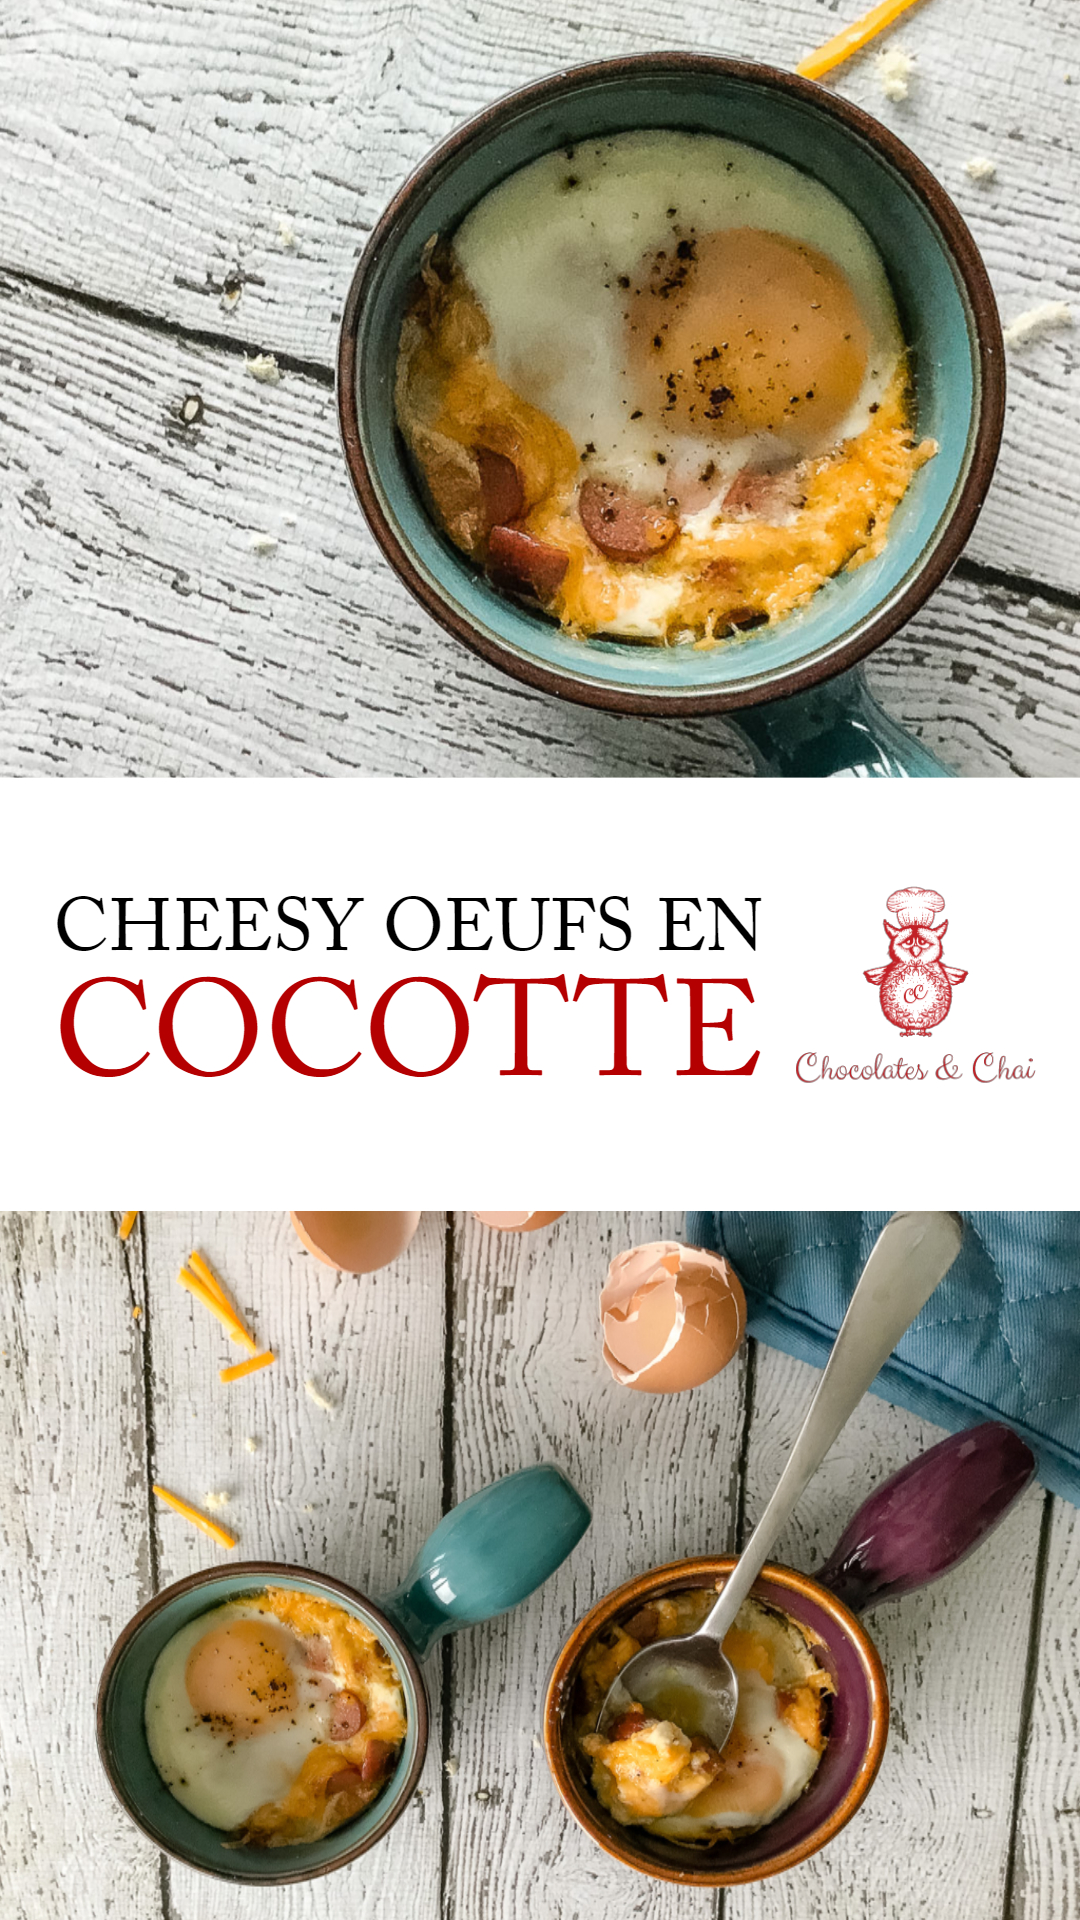 A Pinterest image stitching together two images of Eggs in Pots with a title card in the middle saying "Cheesy Oeufs en Cocotte."